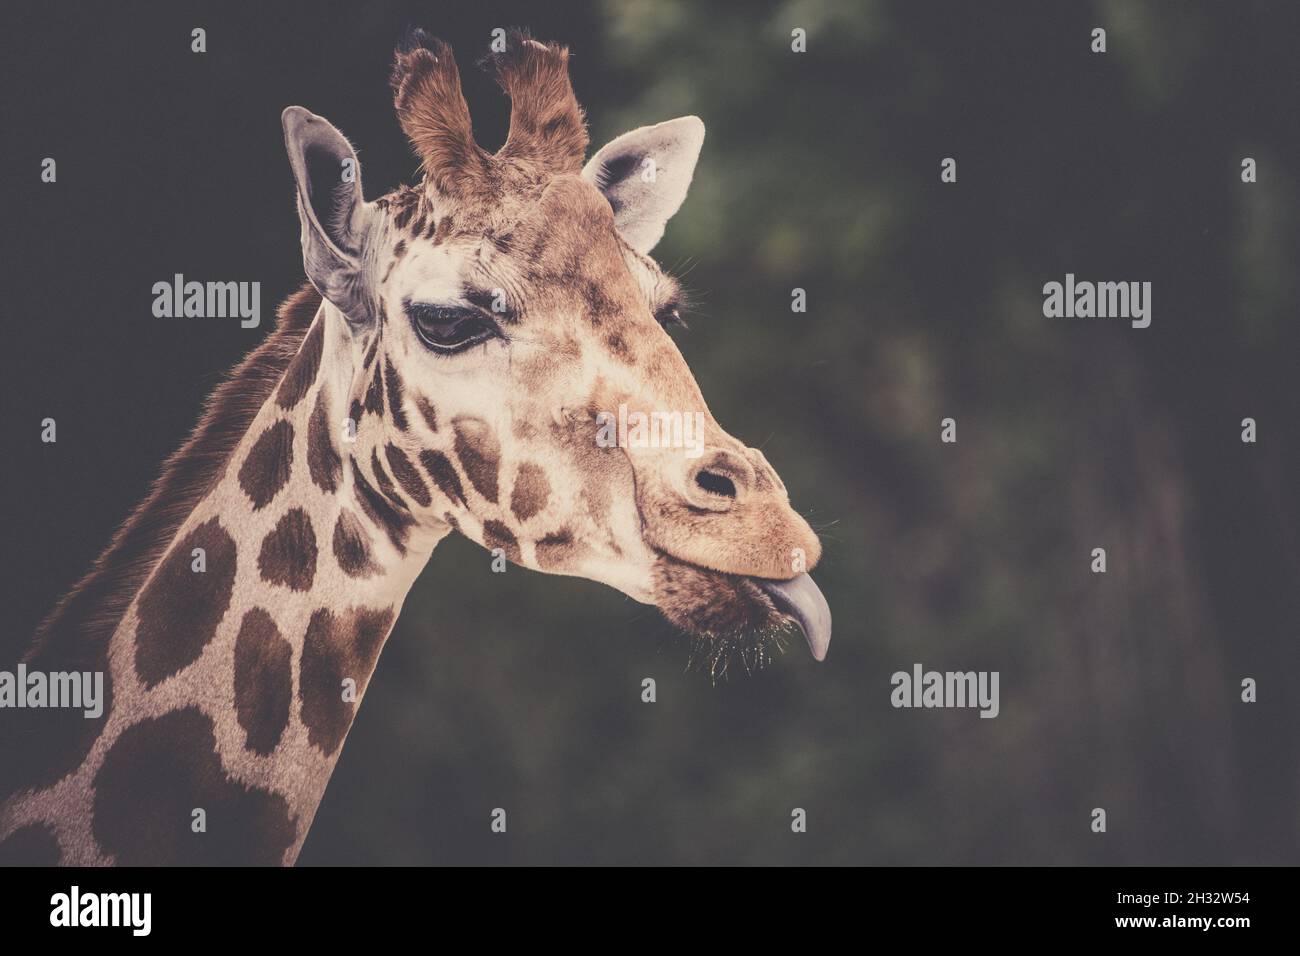 Cute giraffe portrait with tongue lolling out Stock Photo